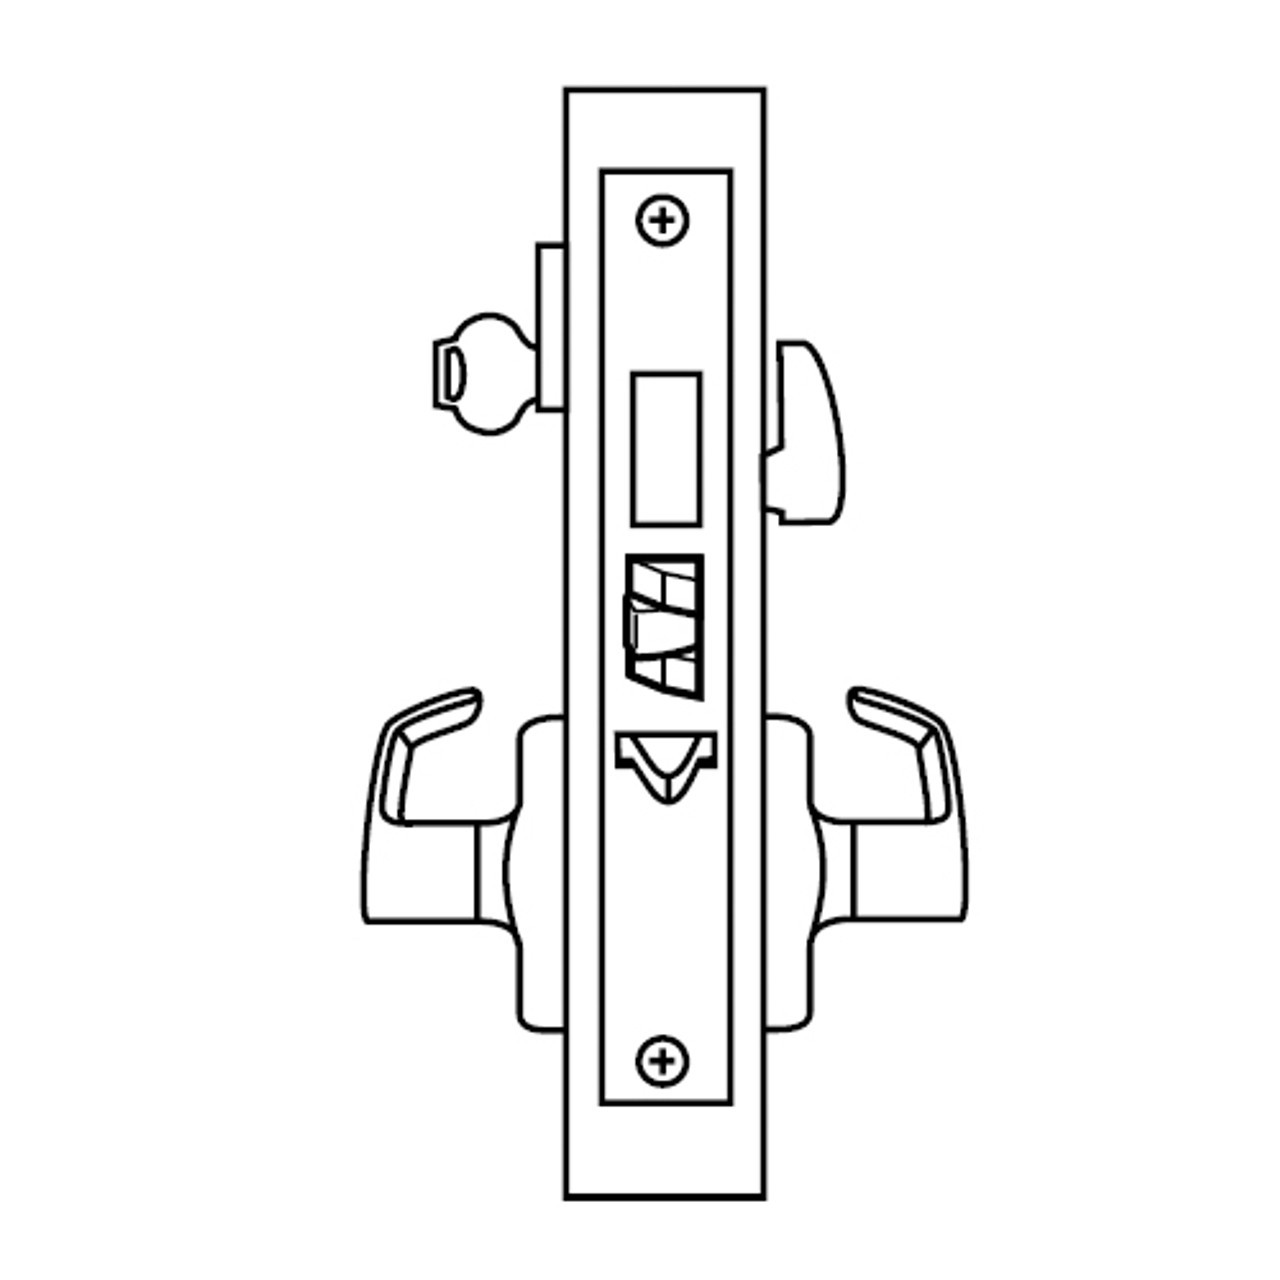 ML2075-DSB-629-LH Corbin Russwin ML2000 Series Mortise Entrance or Office Security Locksets with Dirke Lever and Deadbolt in Bright Stainless Steel